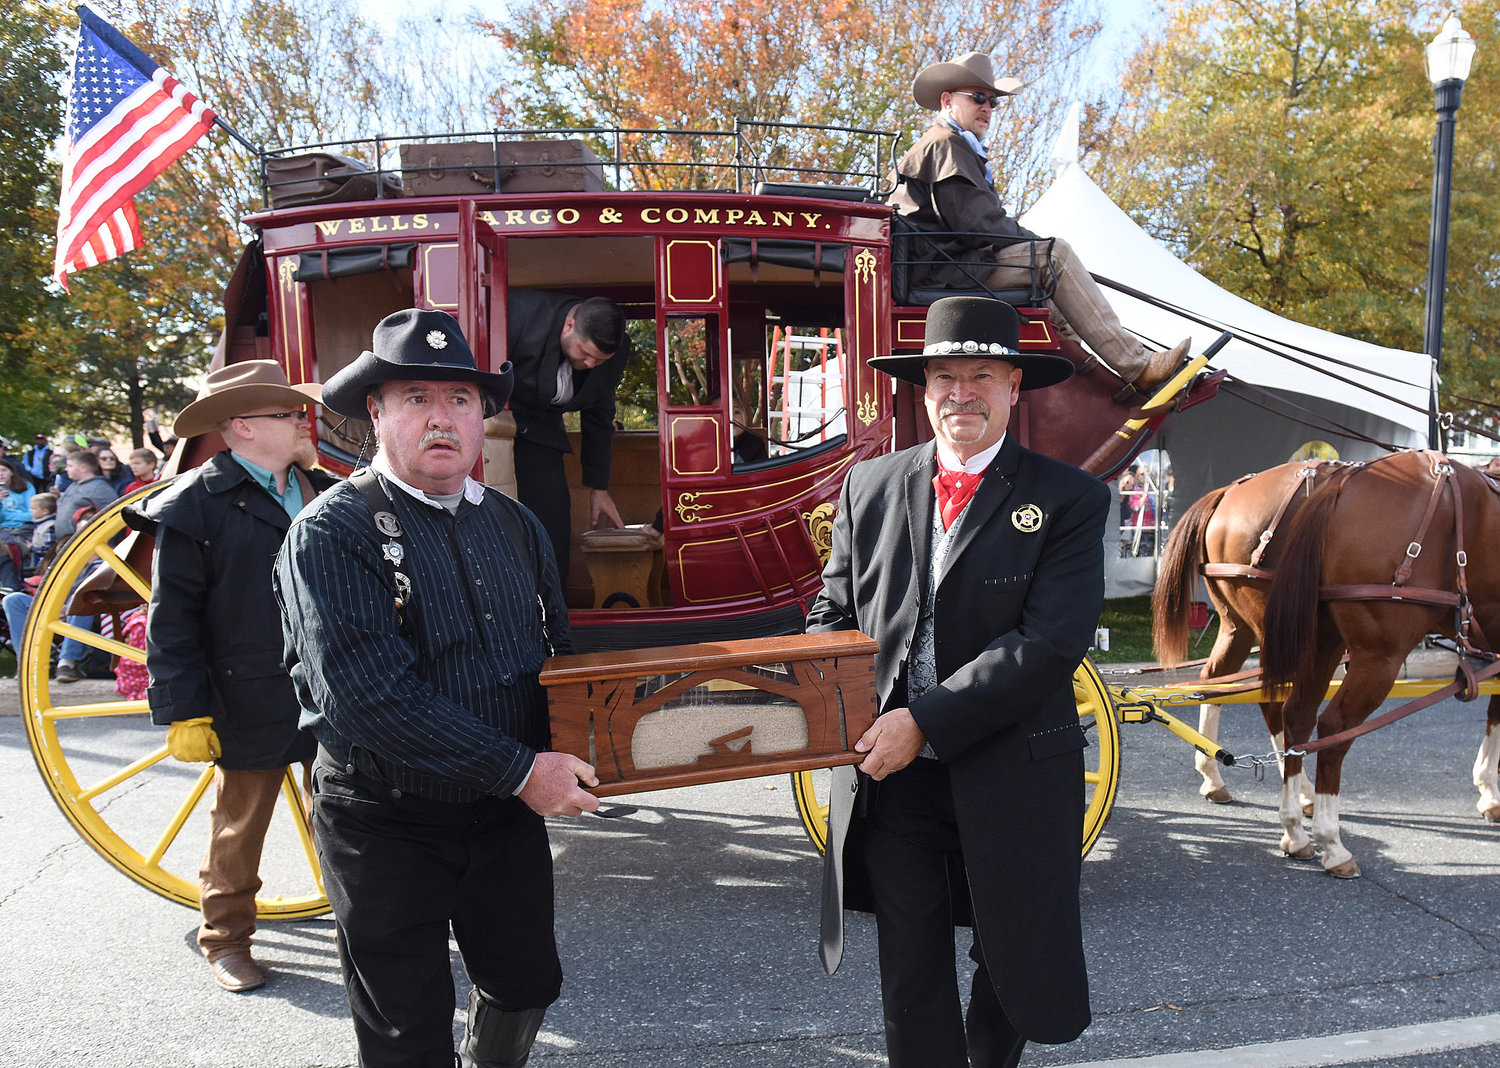 The box for the ceremonial burying of the hatchet arrived at Sussex County Return Day in 2018 with a special Wells Fargo carriage delivery. Special to the Delaware State News / Chuck Snyder.